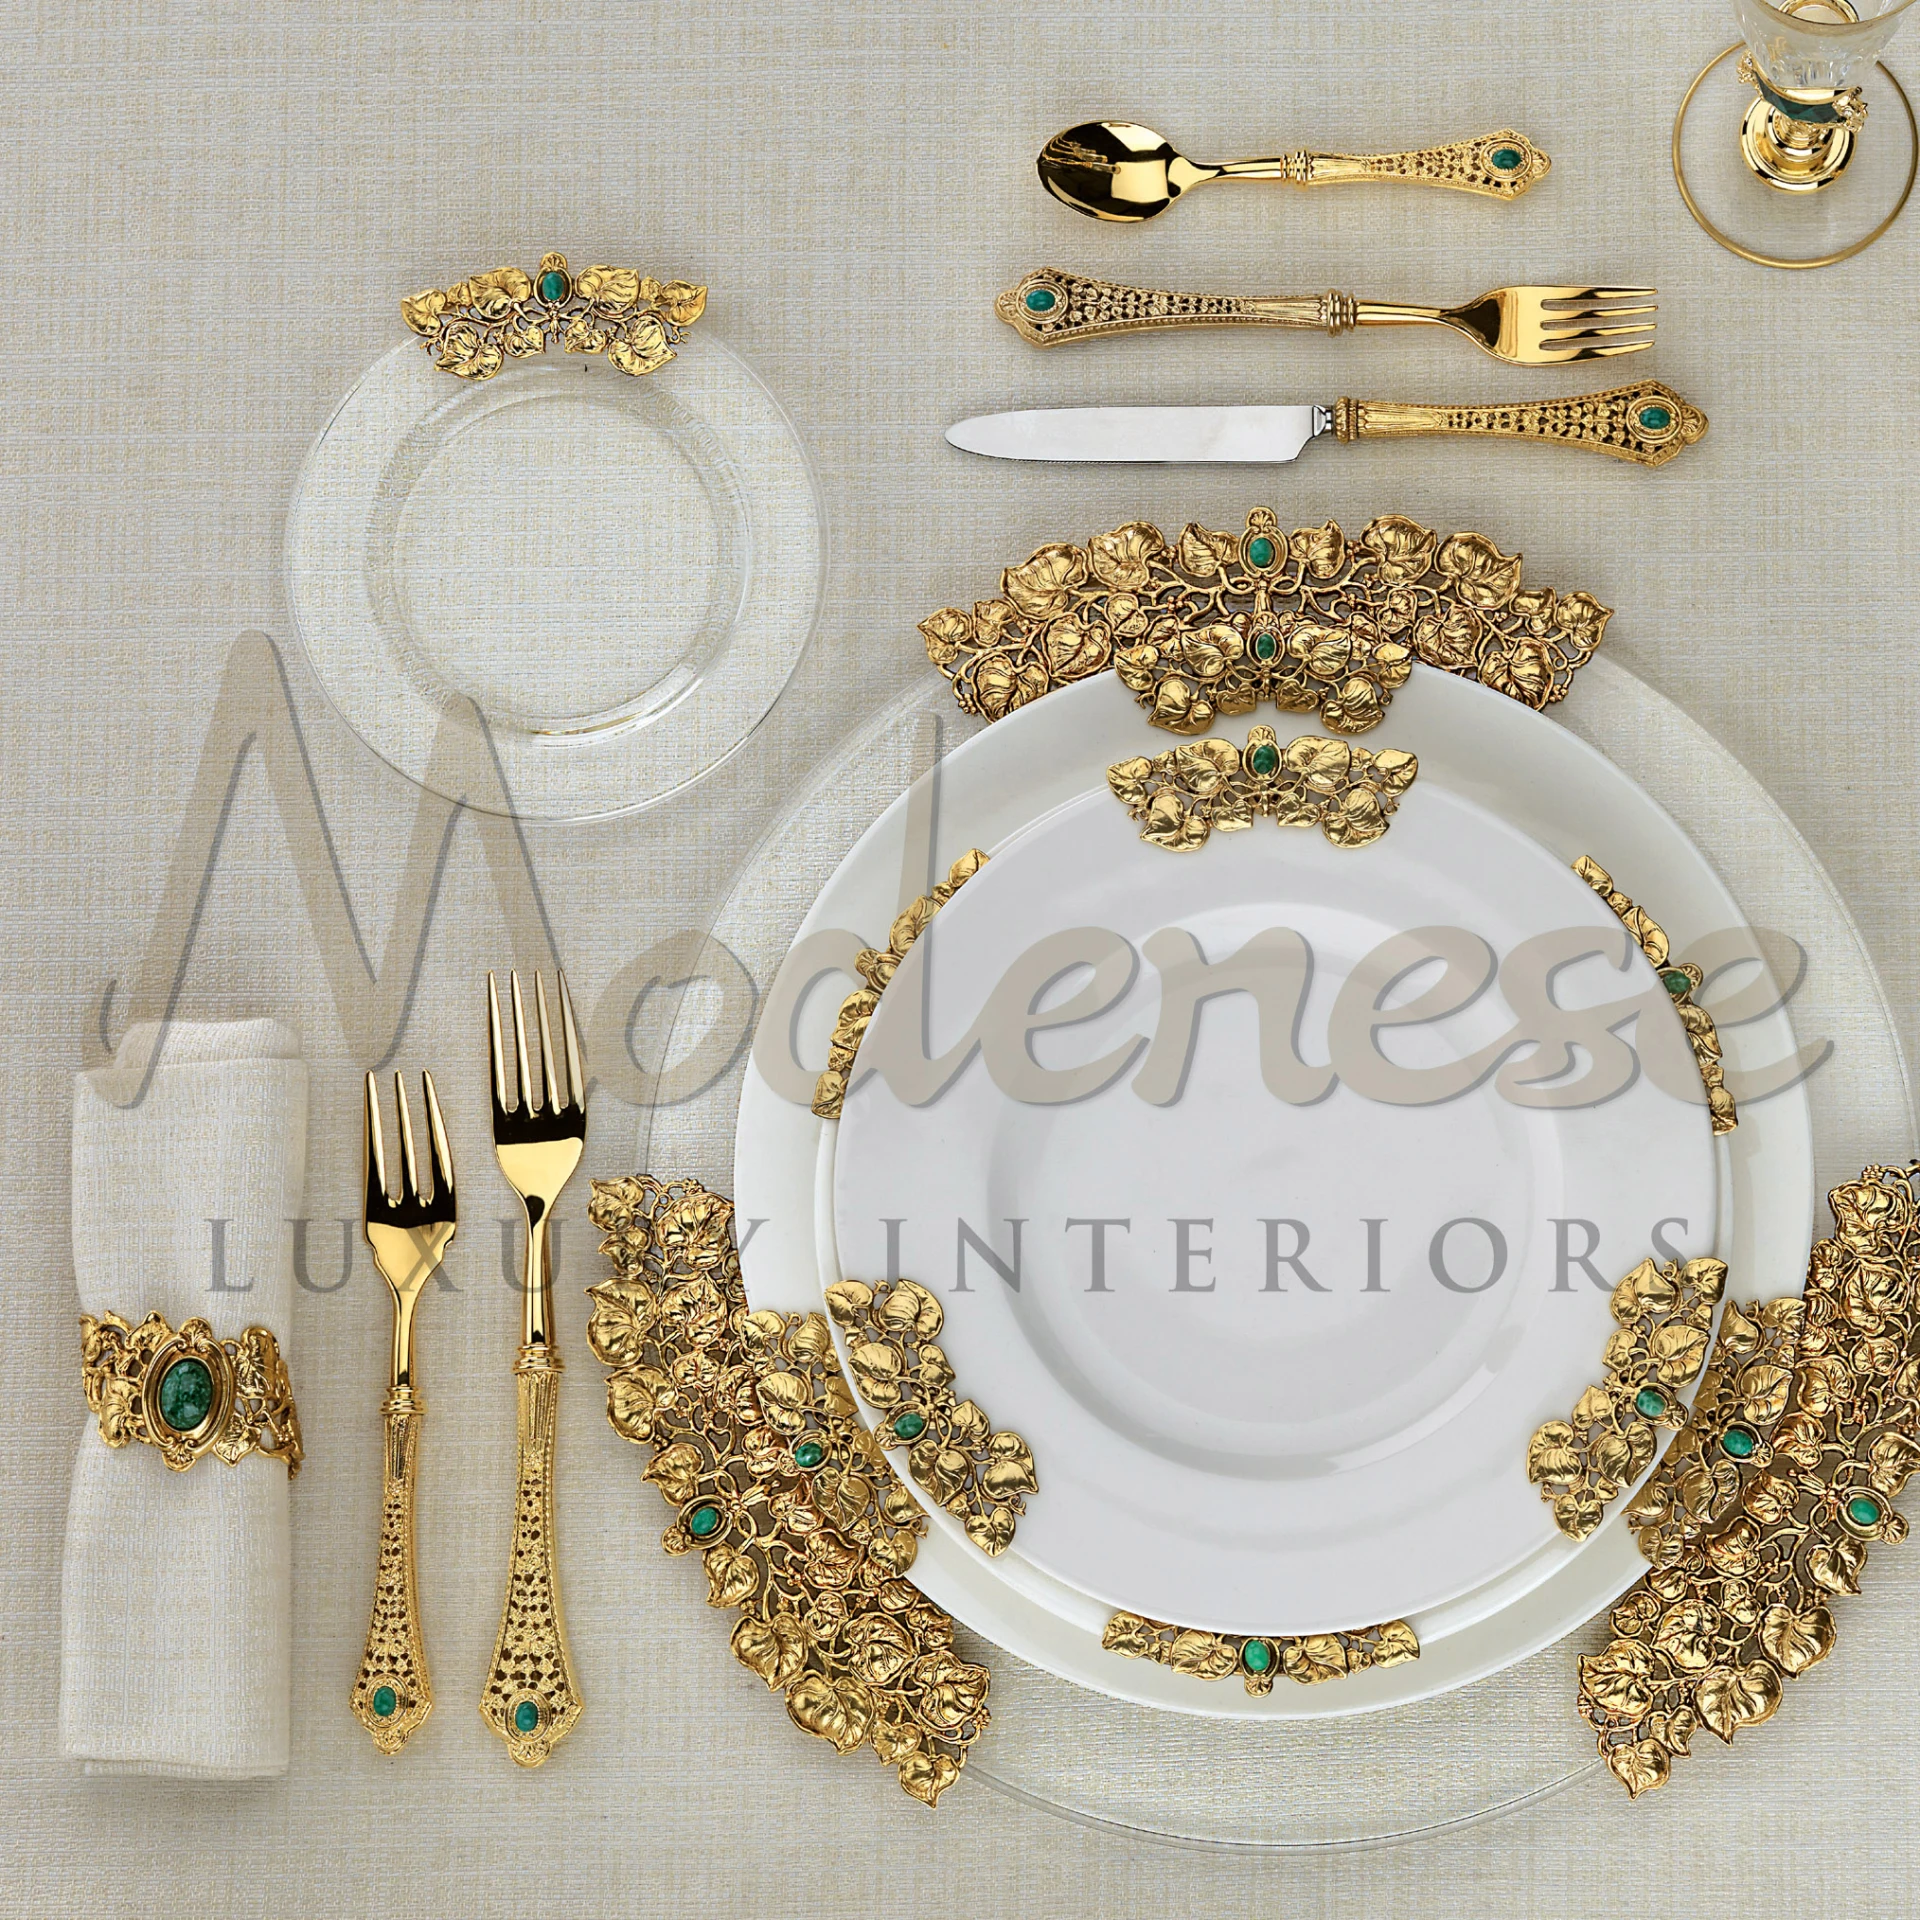 Luxury table setting featuring gold cutlery with intricate designs and emerald accents on a beige tablecloth.